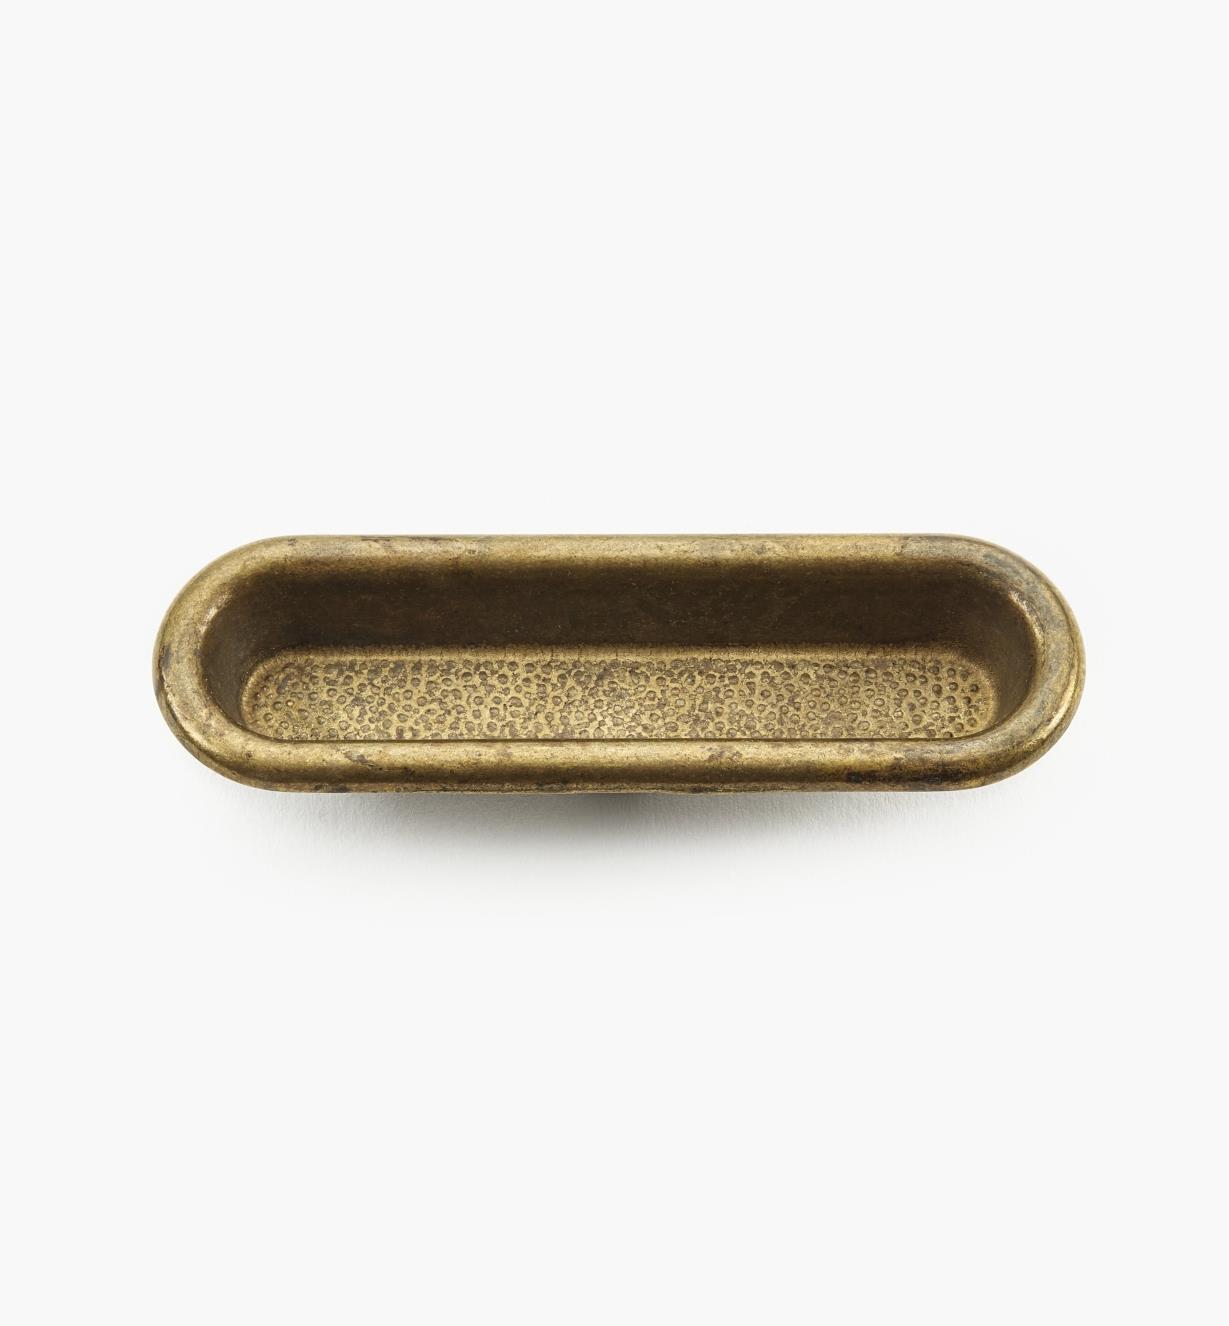 00A9285 - 85mm x 26mm Old Brass Cup Pull